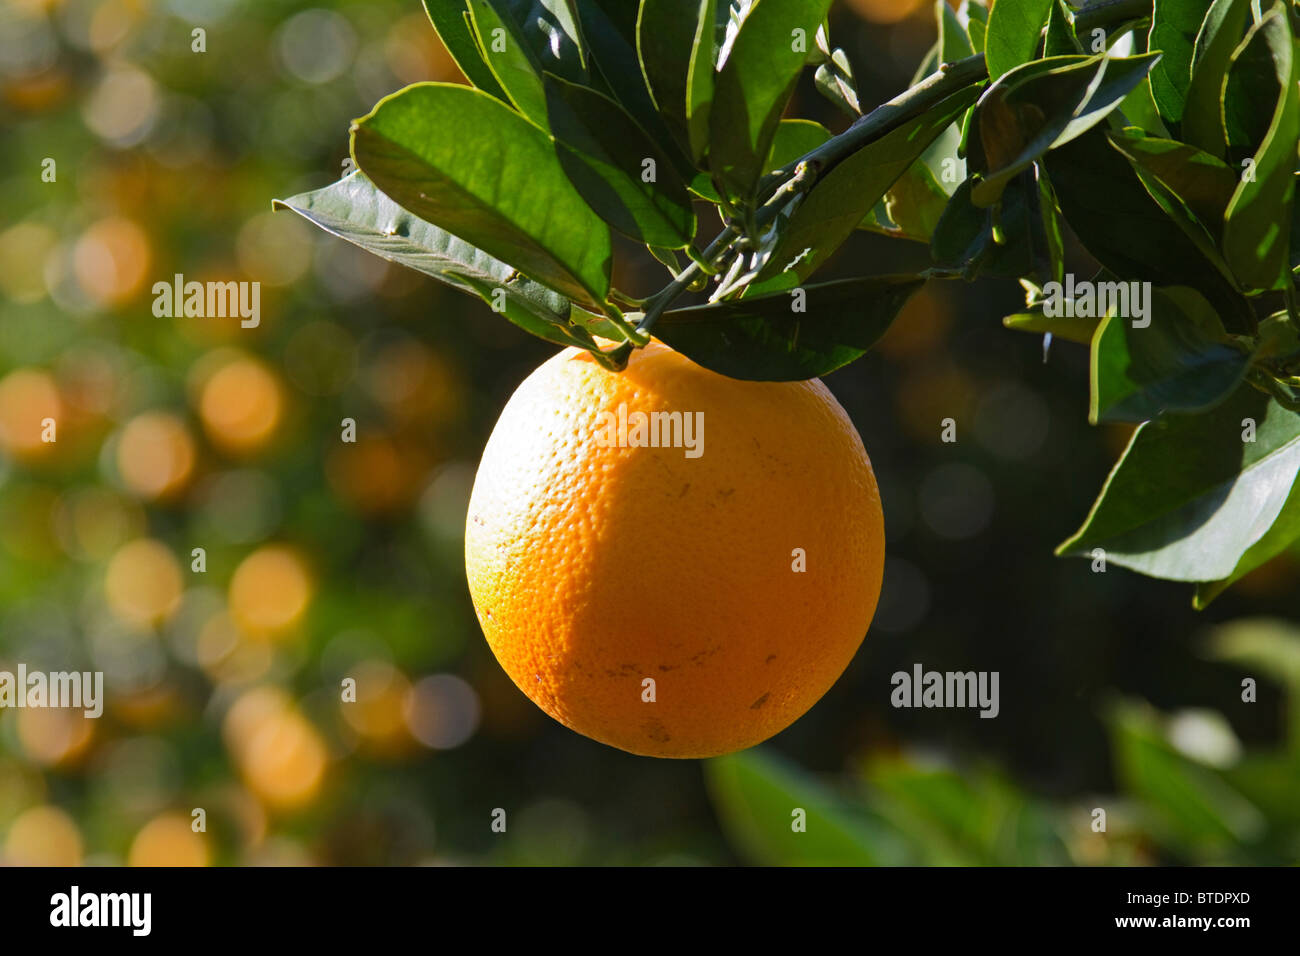 Orange (Citrus sinensis) hanging from a branch Stock Photo